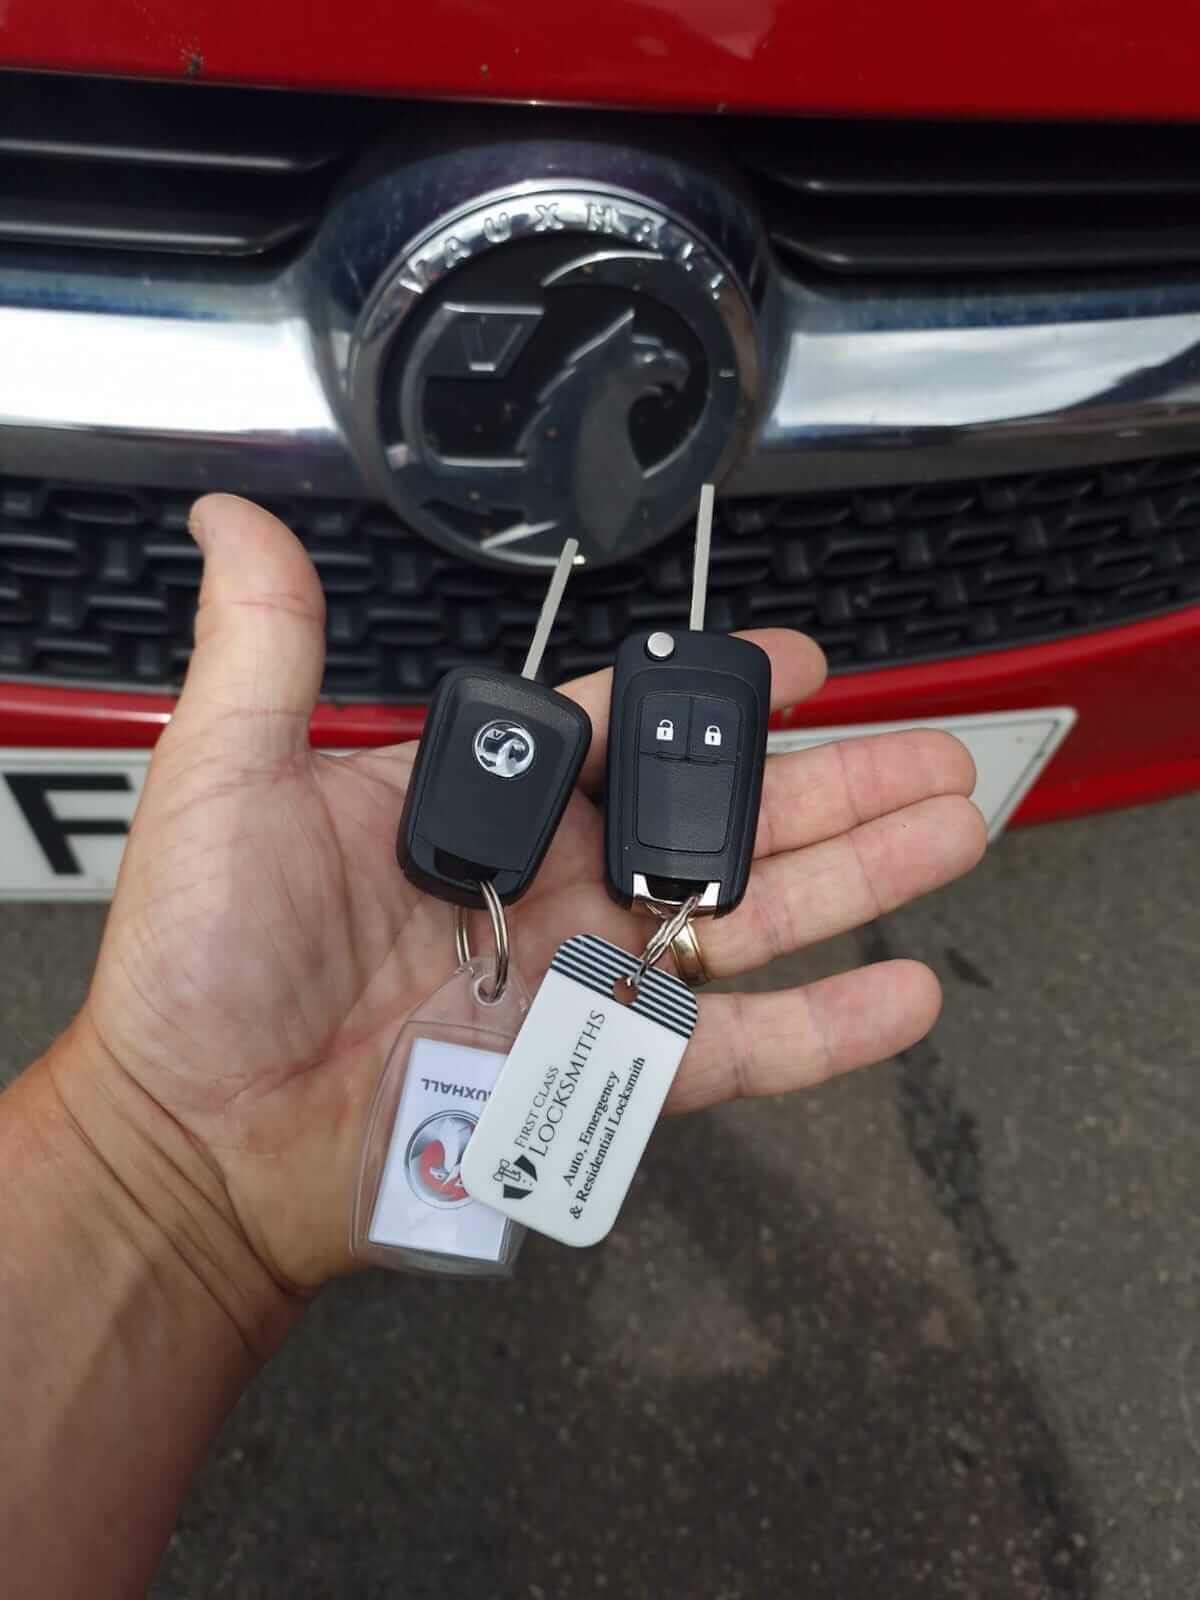 new key fob replacement for a Vauxhall